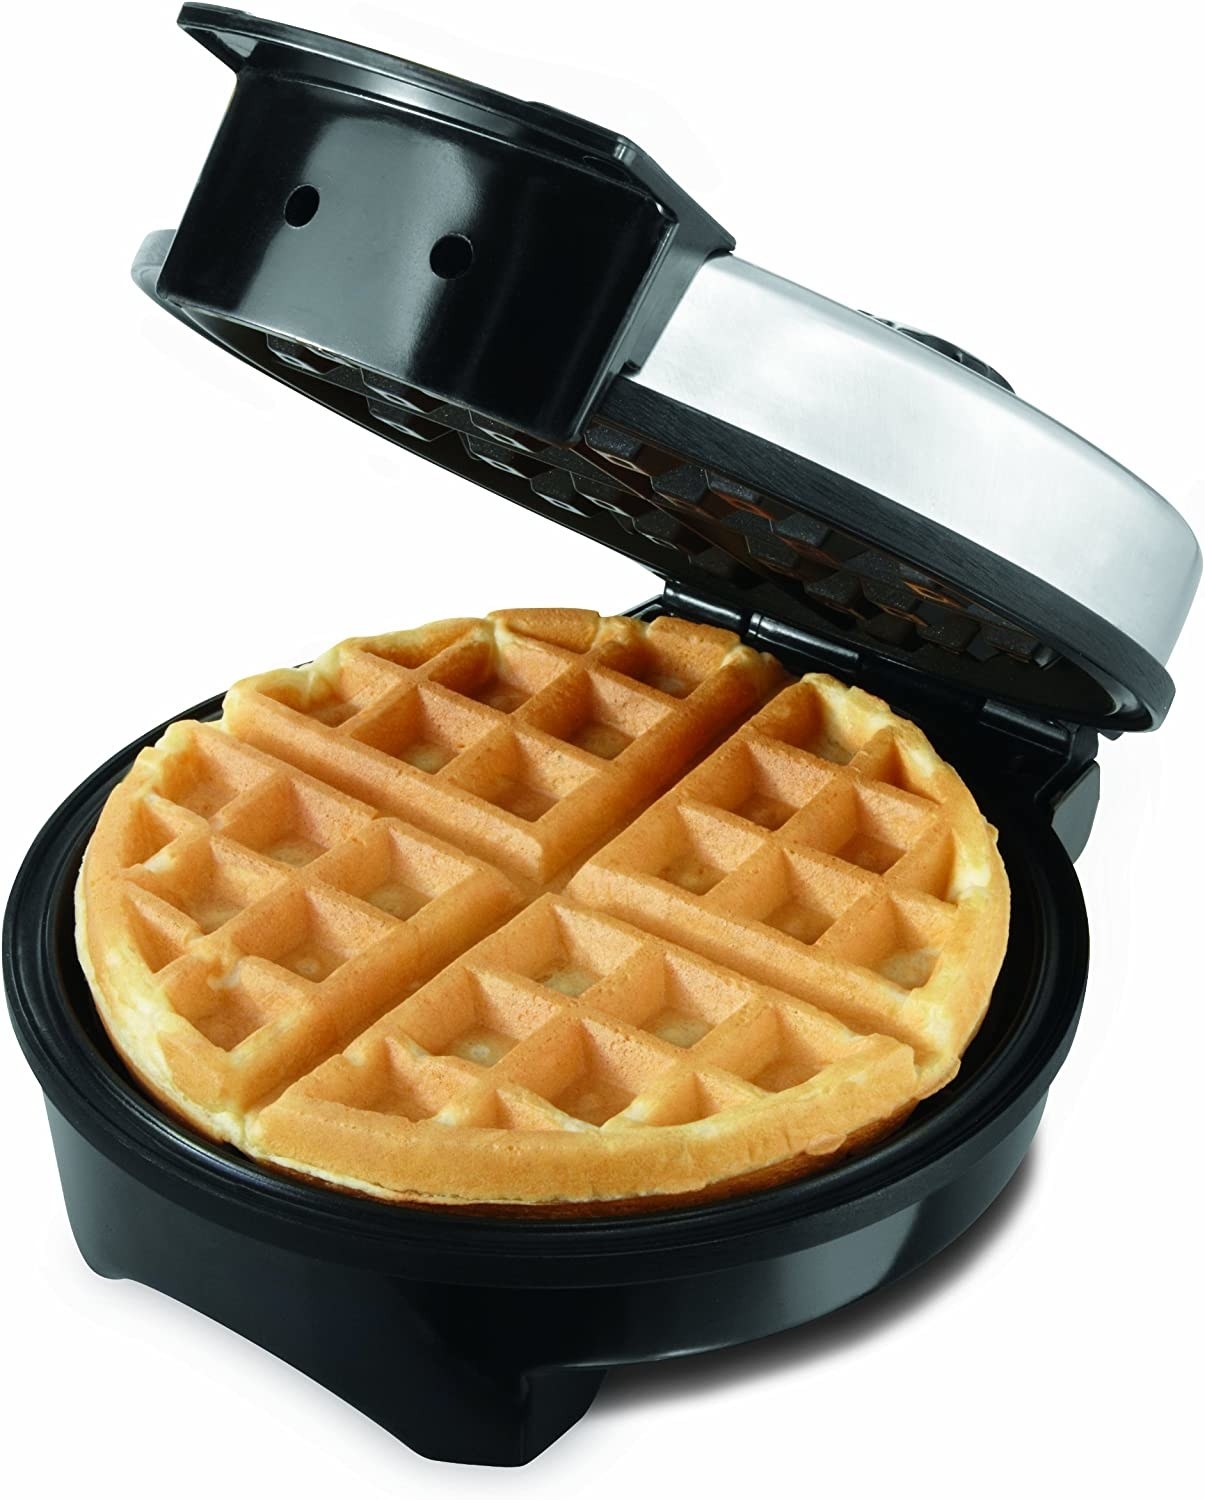 a waffle maker on a white background